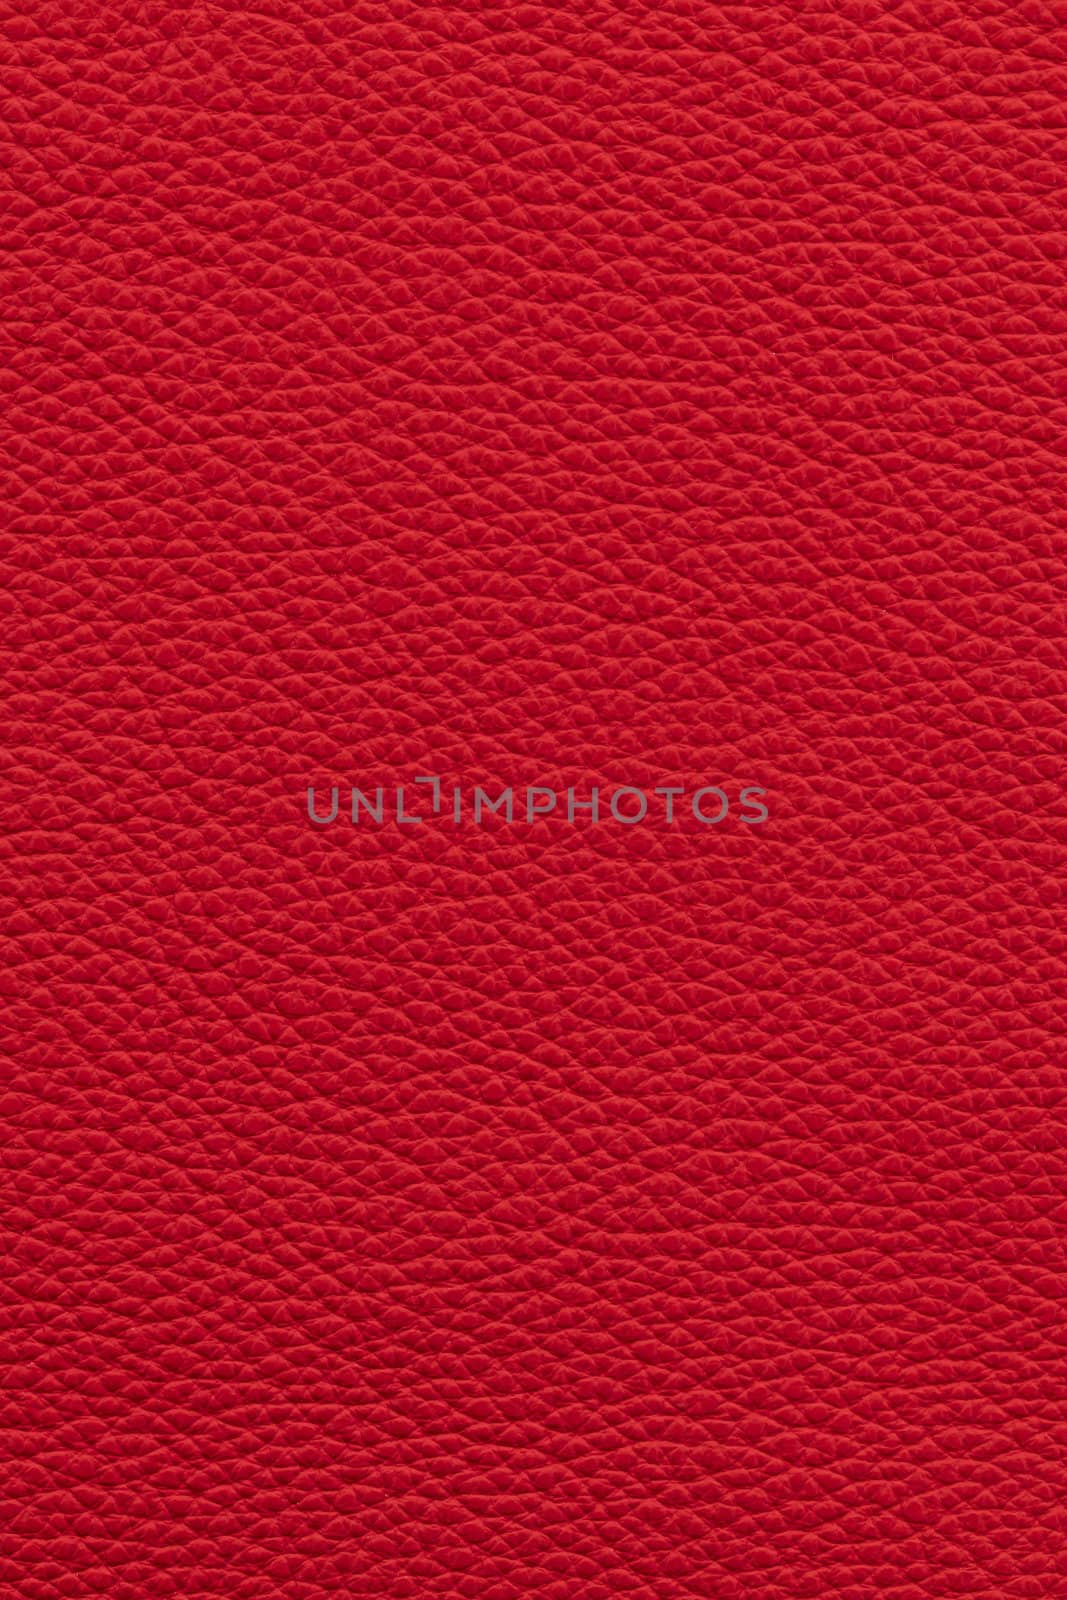 Red natural leather background or texture close up